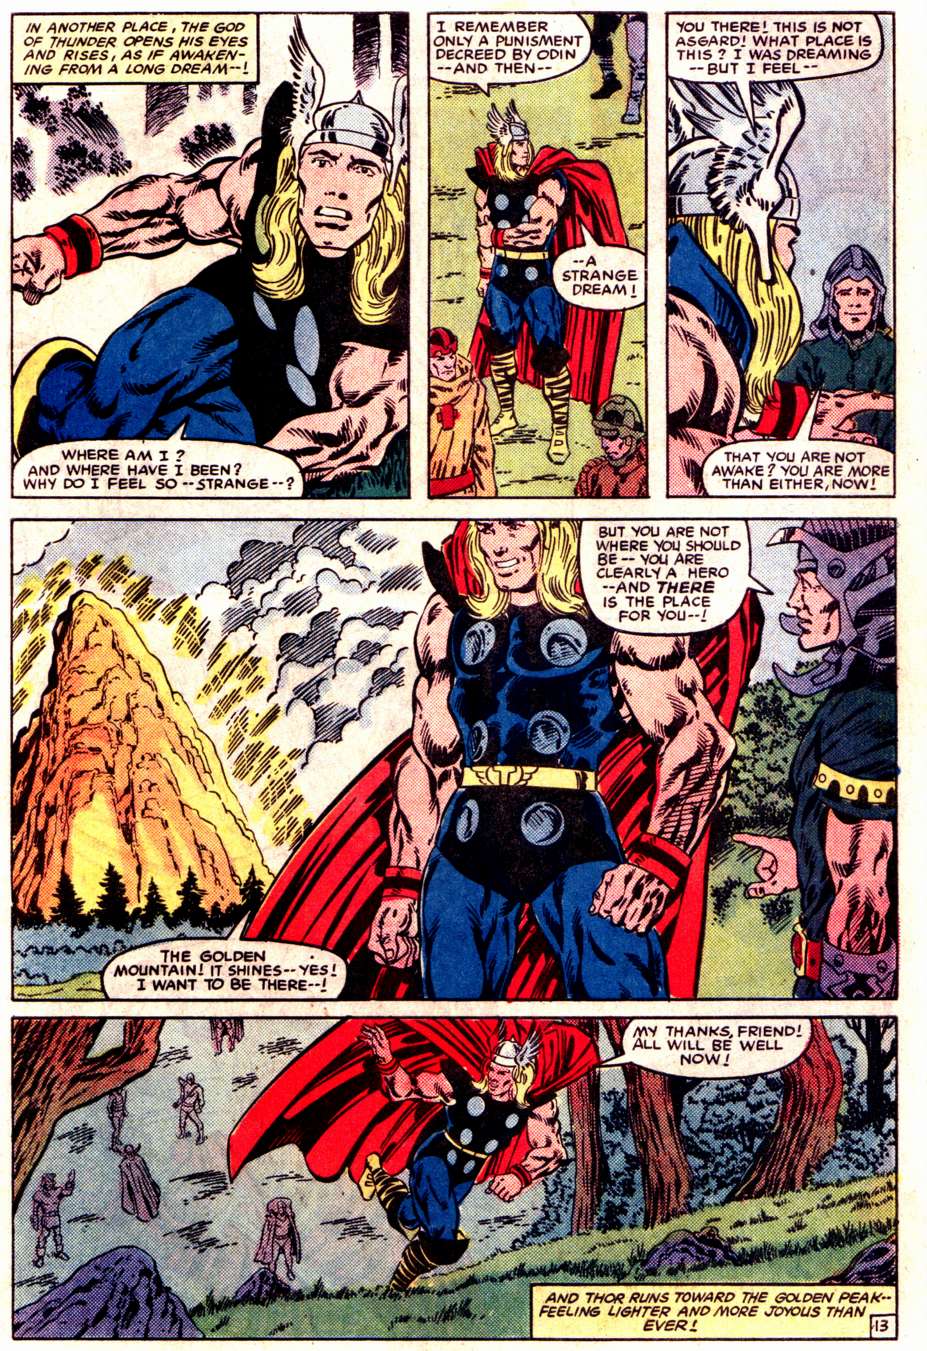 What If? (1977) issue 47 - Loki had found The hammer of Thor - Page 14